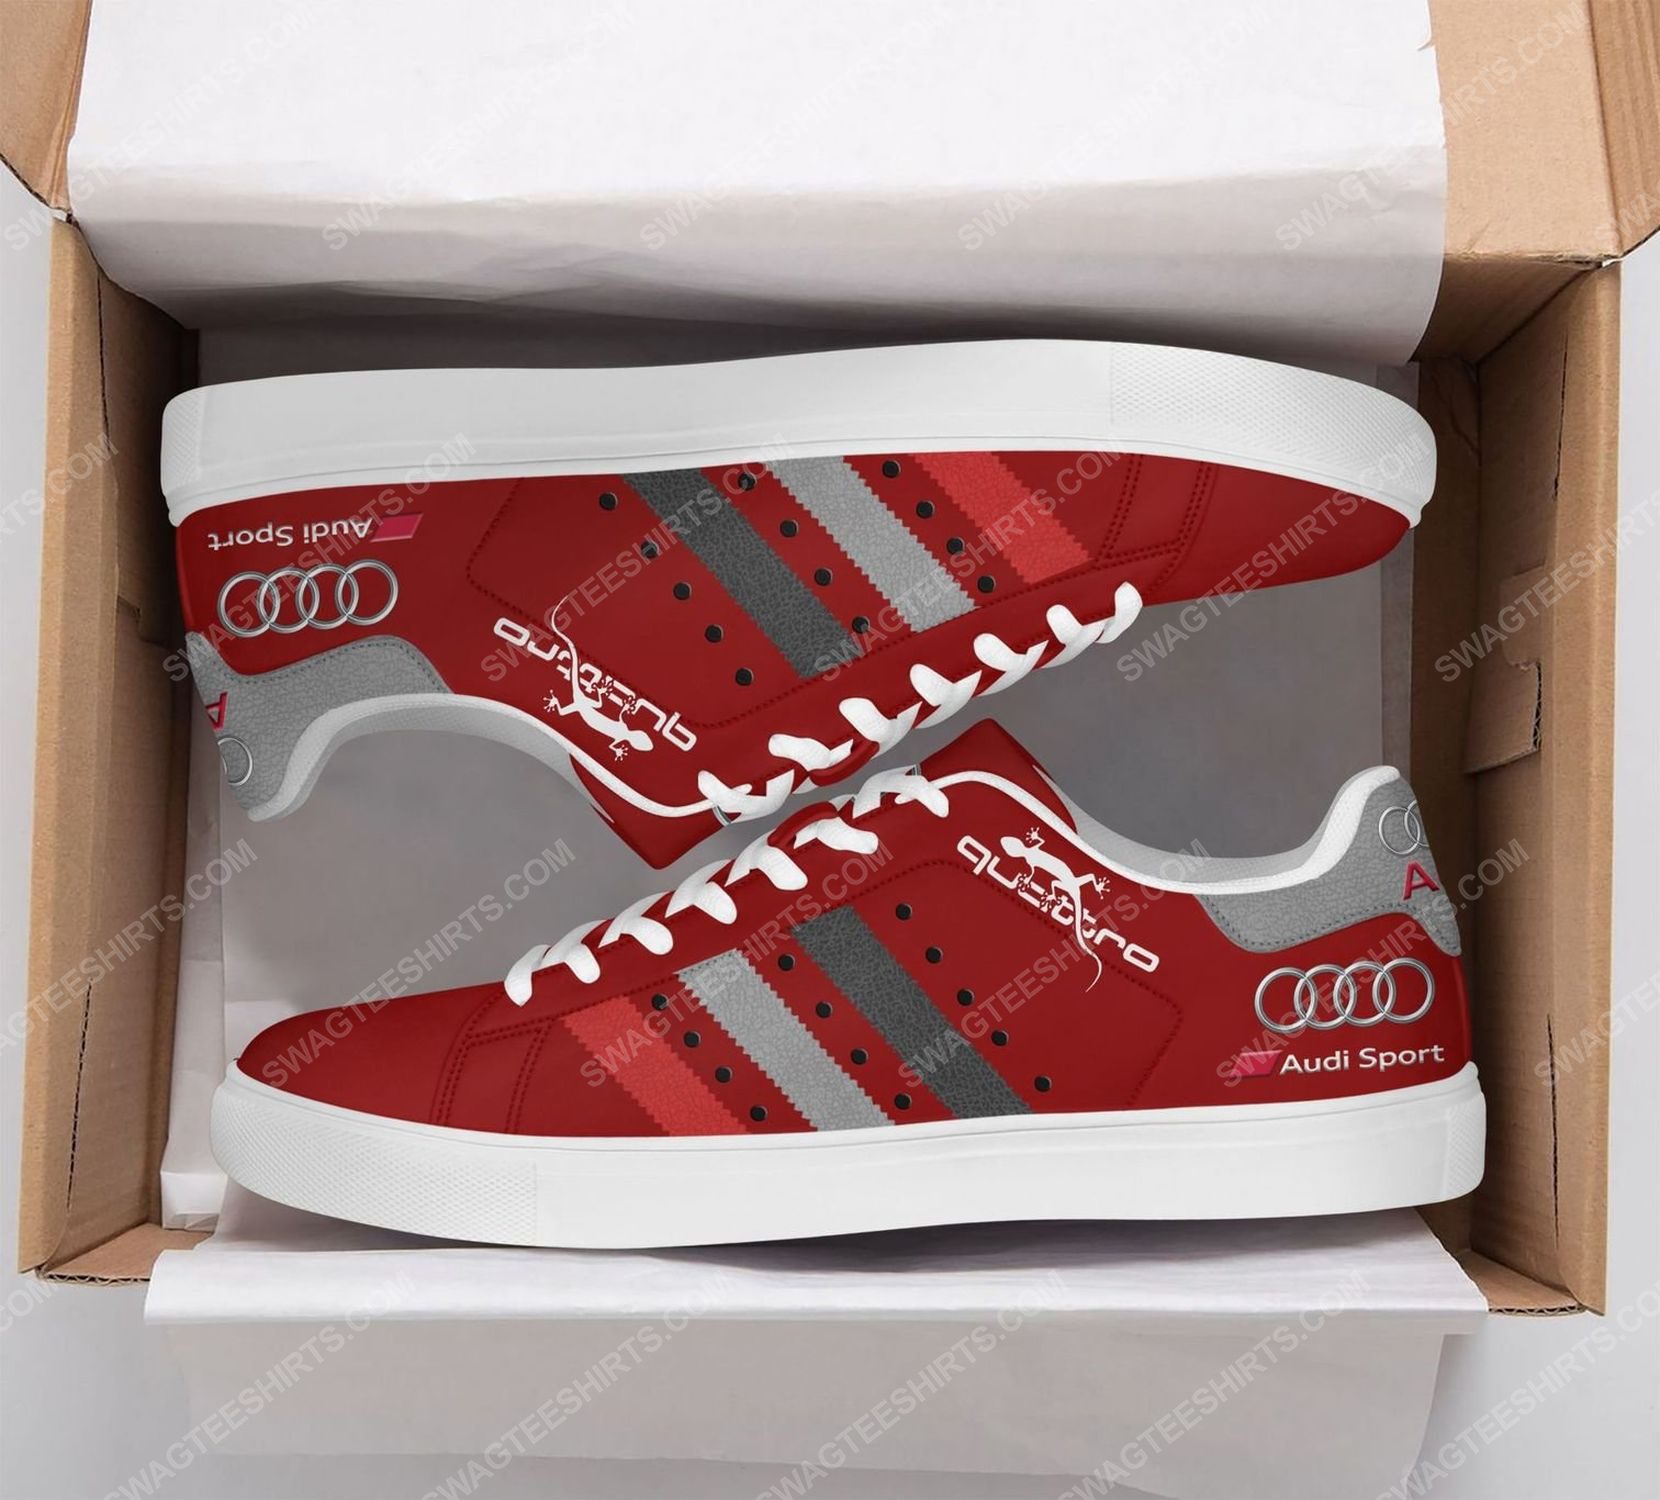 The audi quattro version red stan smith shoes 2